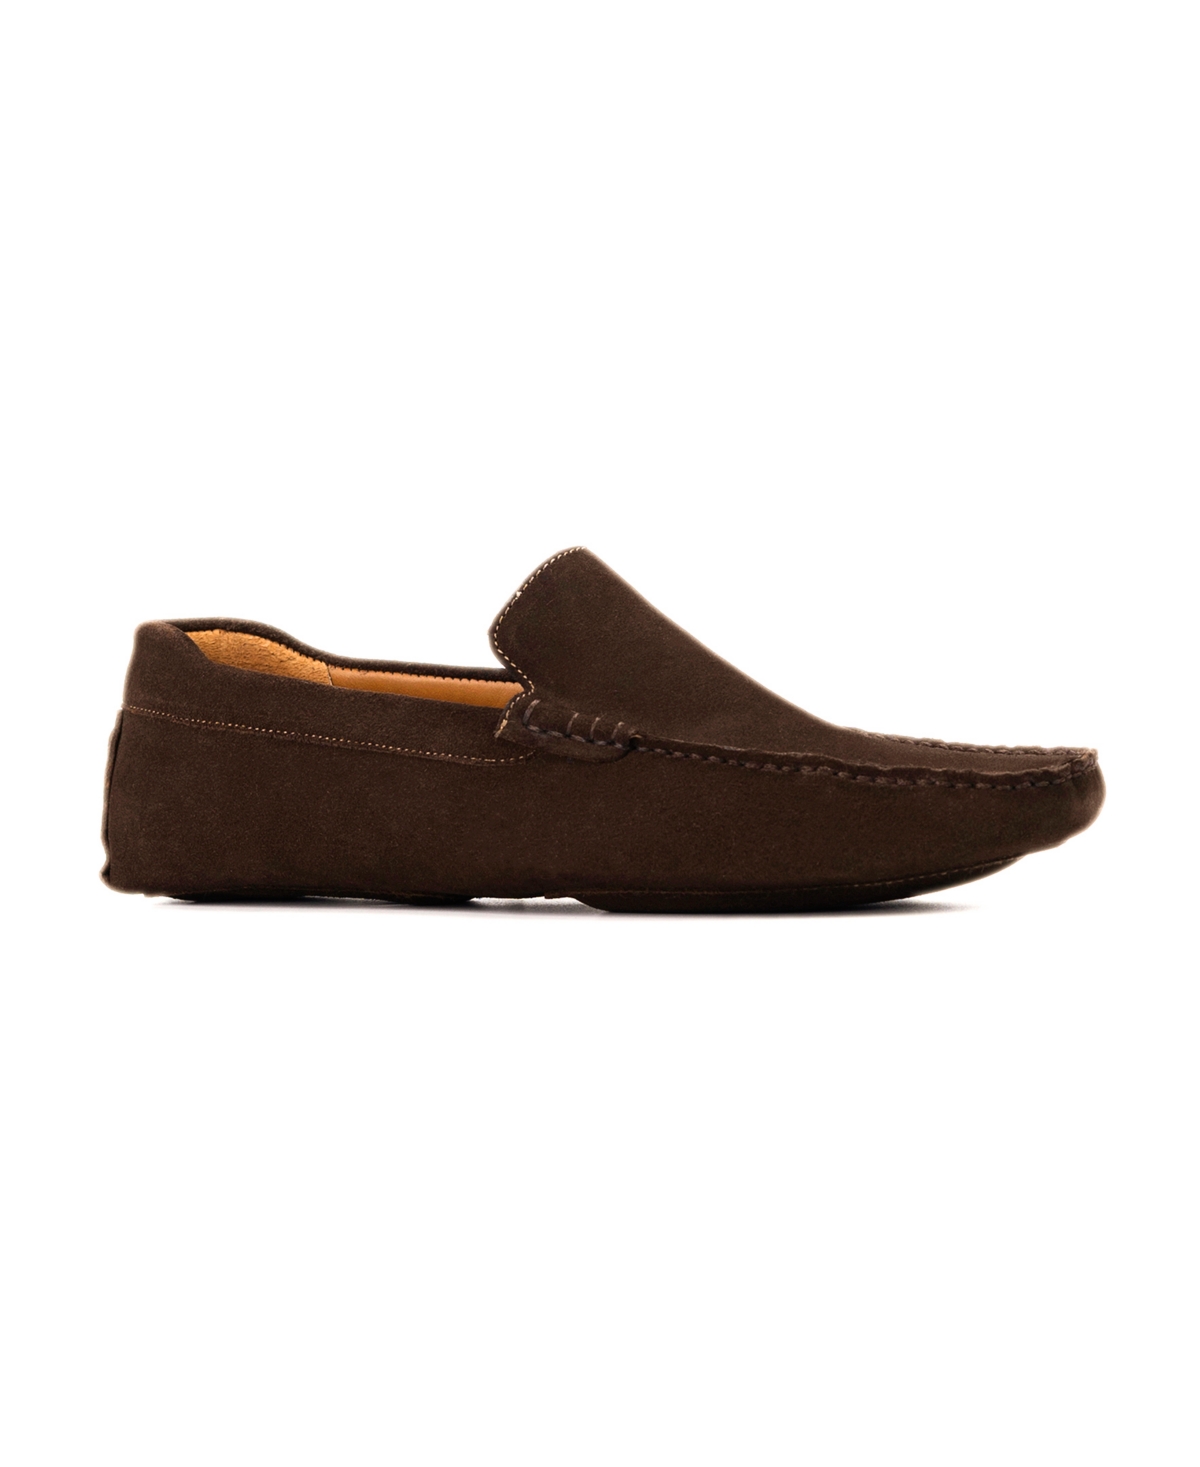 Anthony Veer Men's William House All Suede For Home Loafers Men's Shoes In Honey Brown